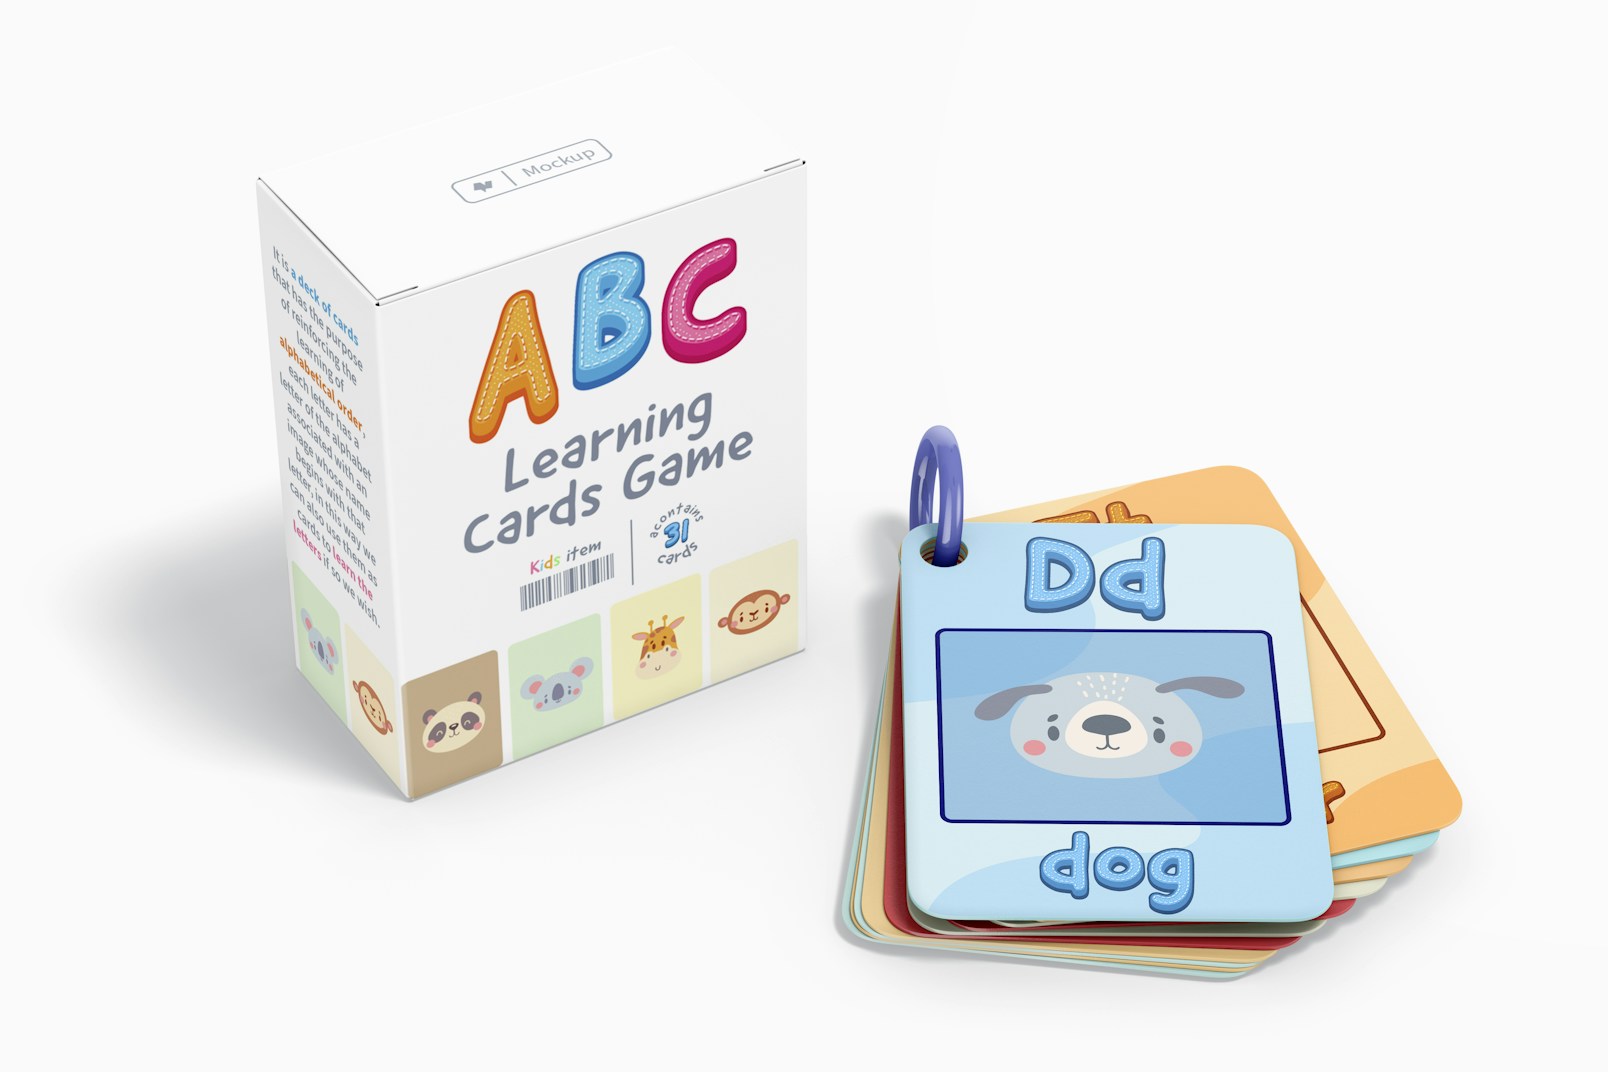 Abc Learning Cards Game Mockup, Perspective